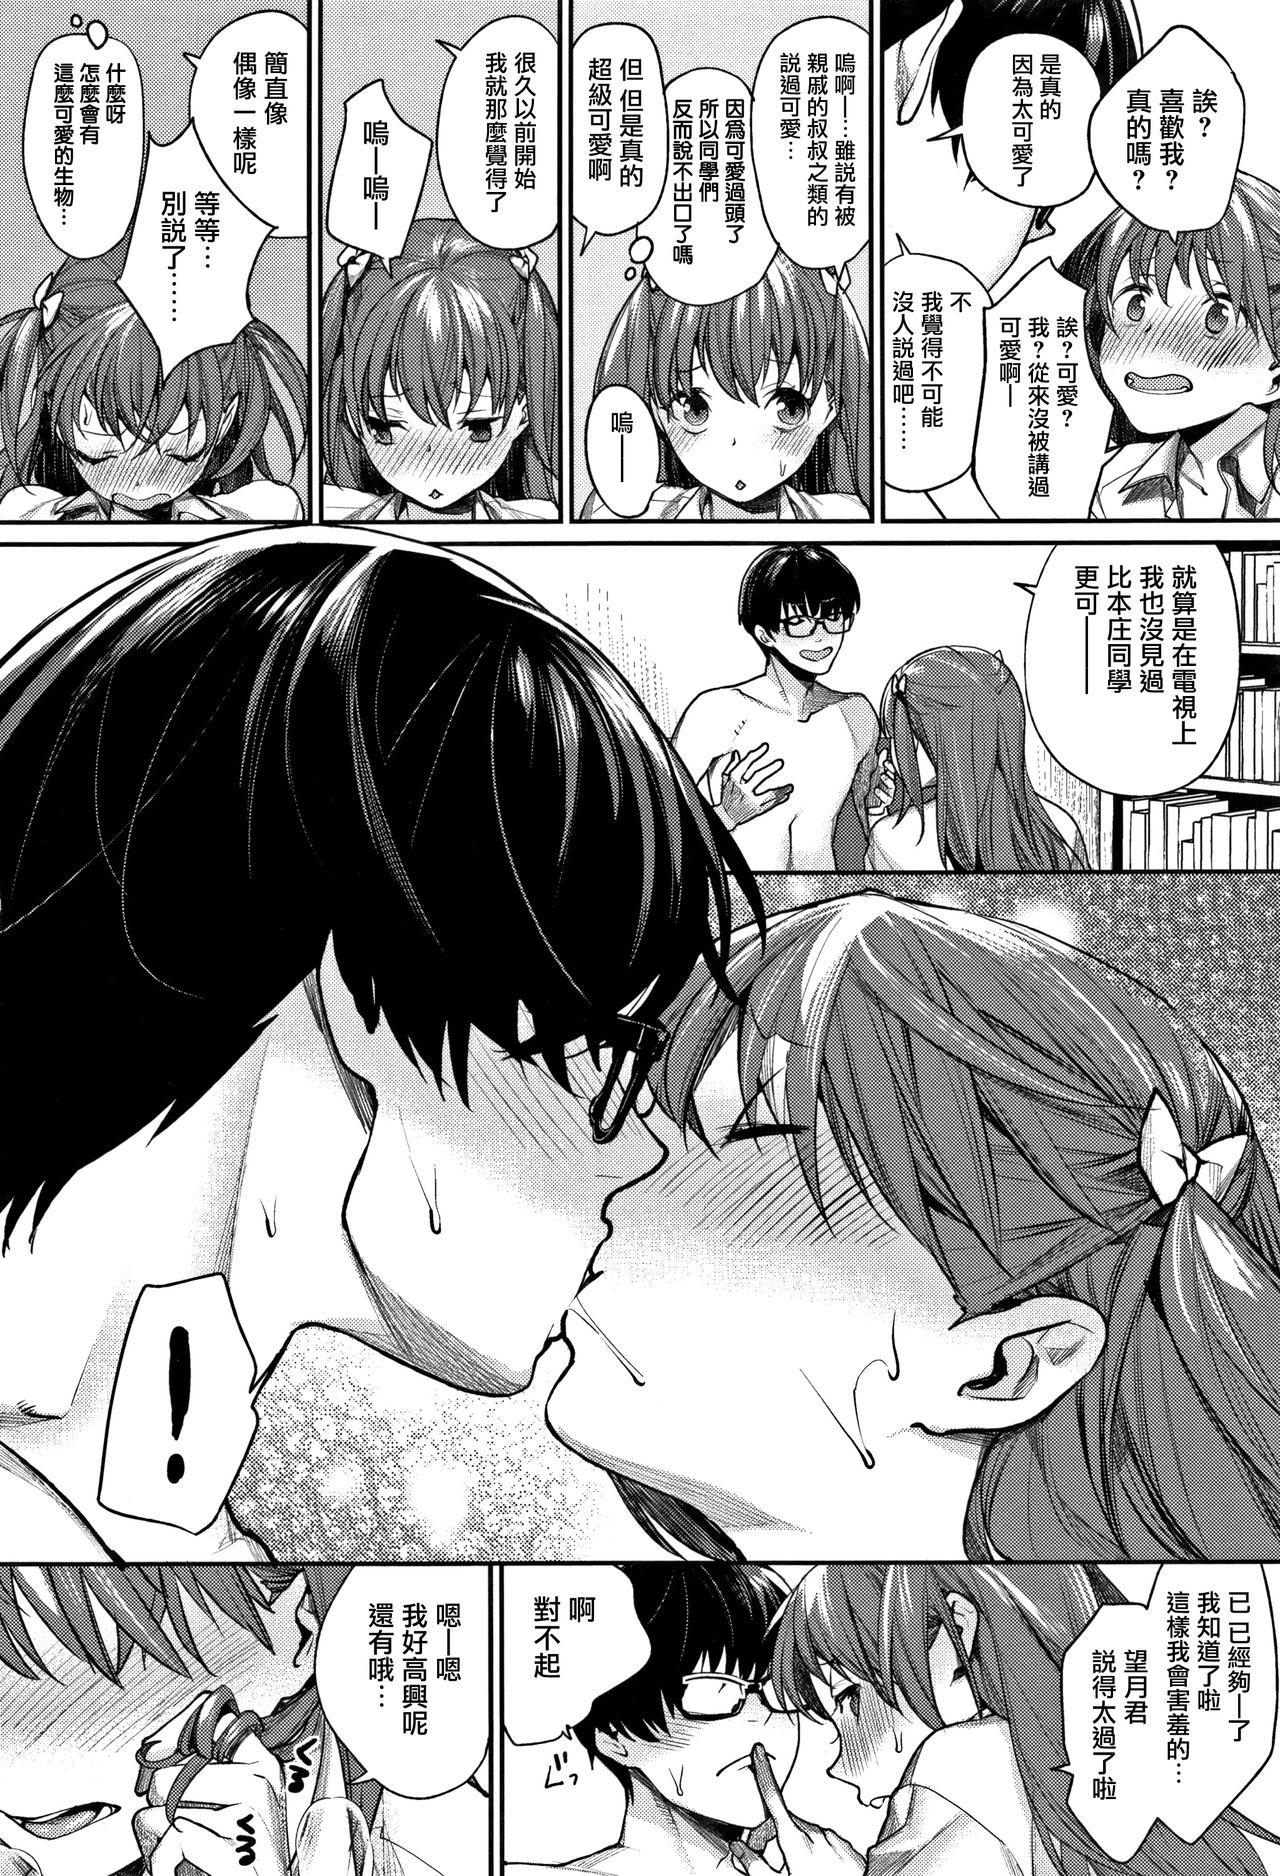 Anal [MGMEE] Bokura no Etude - Our H Chu Do Ch.1-4 [Chinese] [無邪気漢化組] Tgirls - Page 12